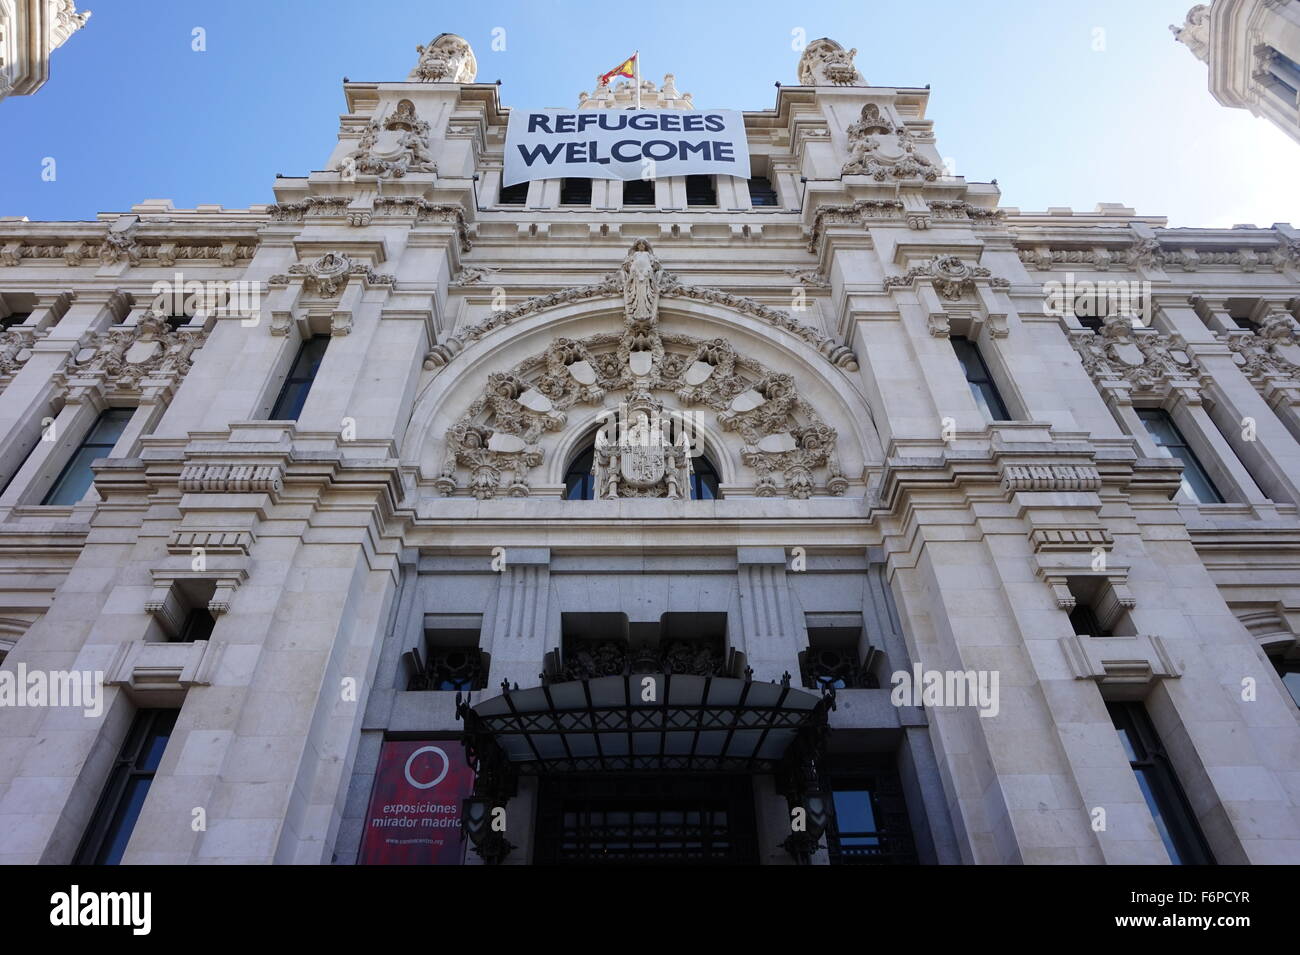 Cybele Palace, Madrid, Spain: Refugees Welcome Stock Photo